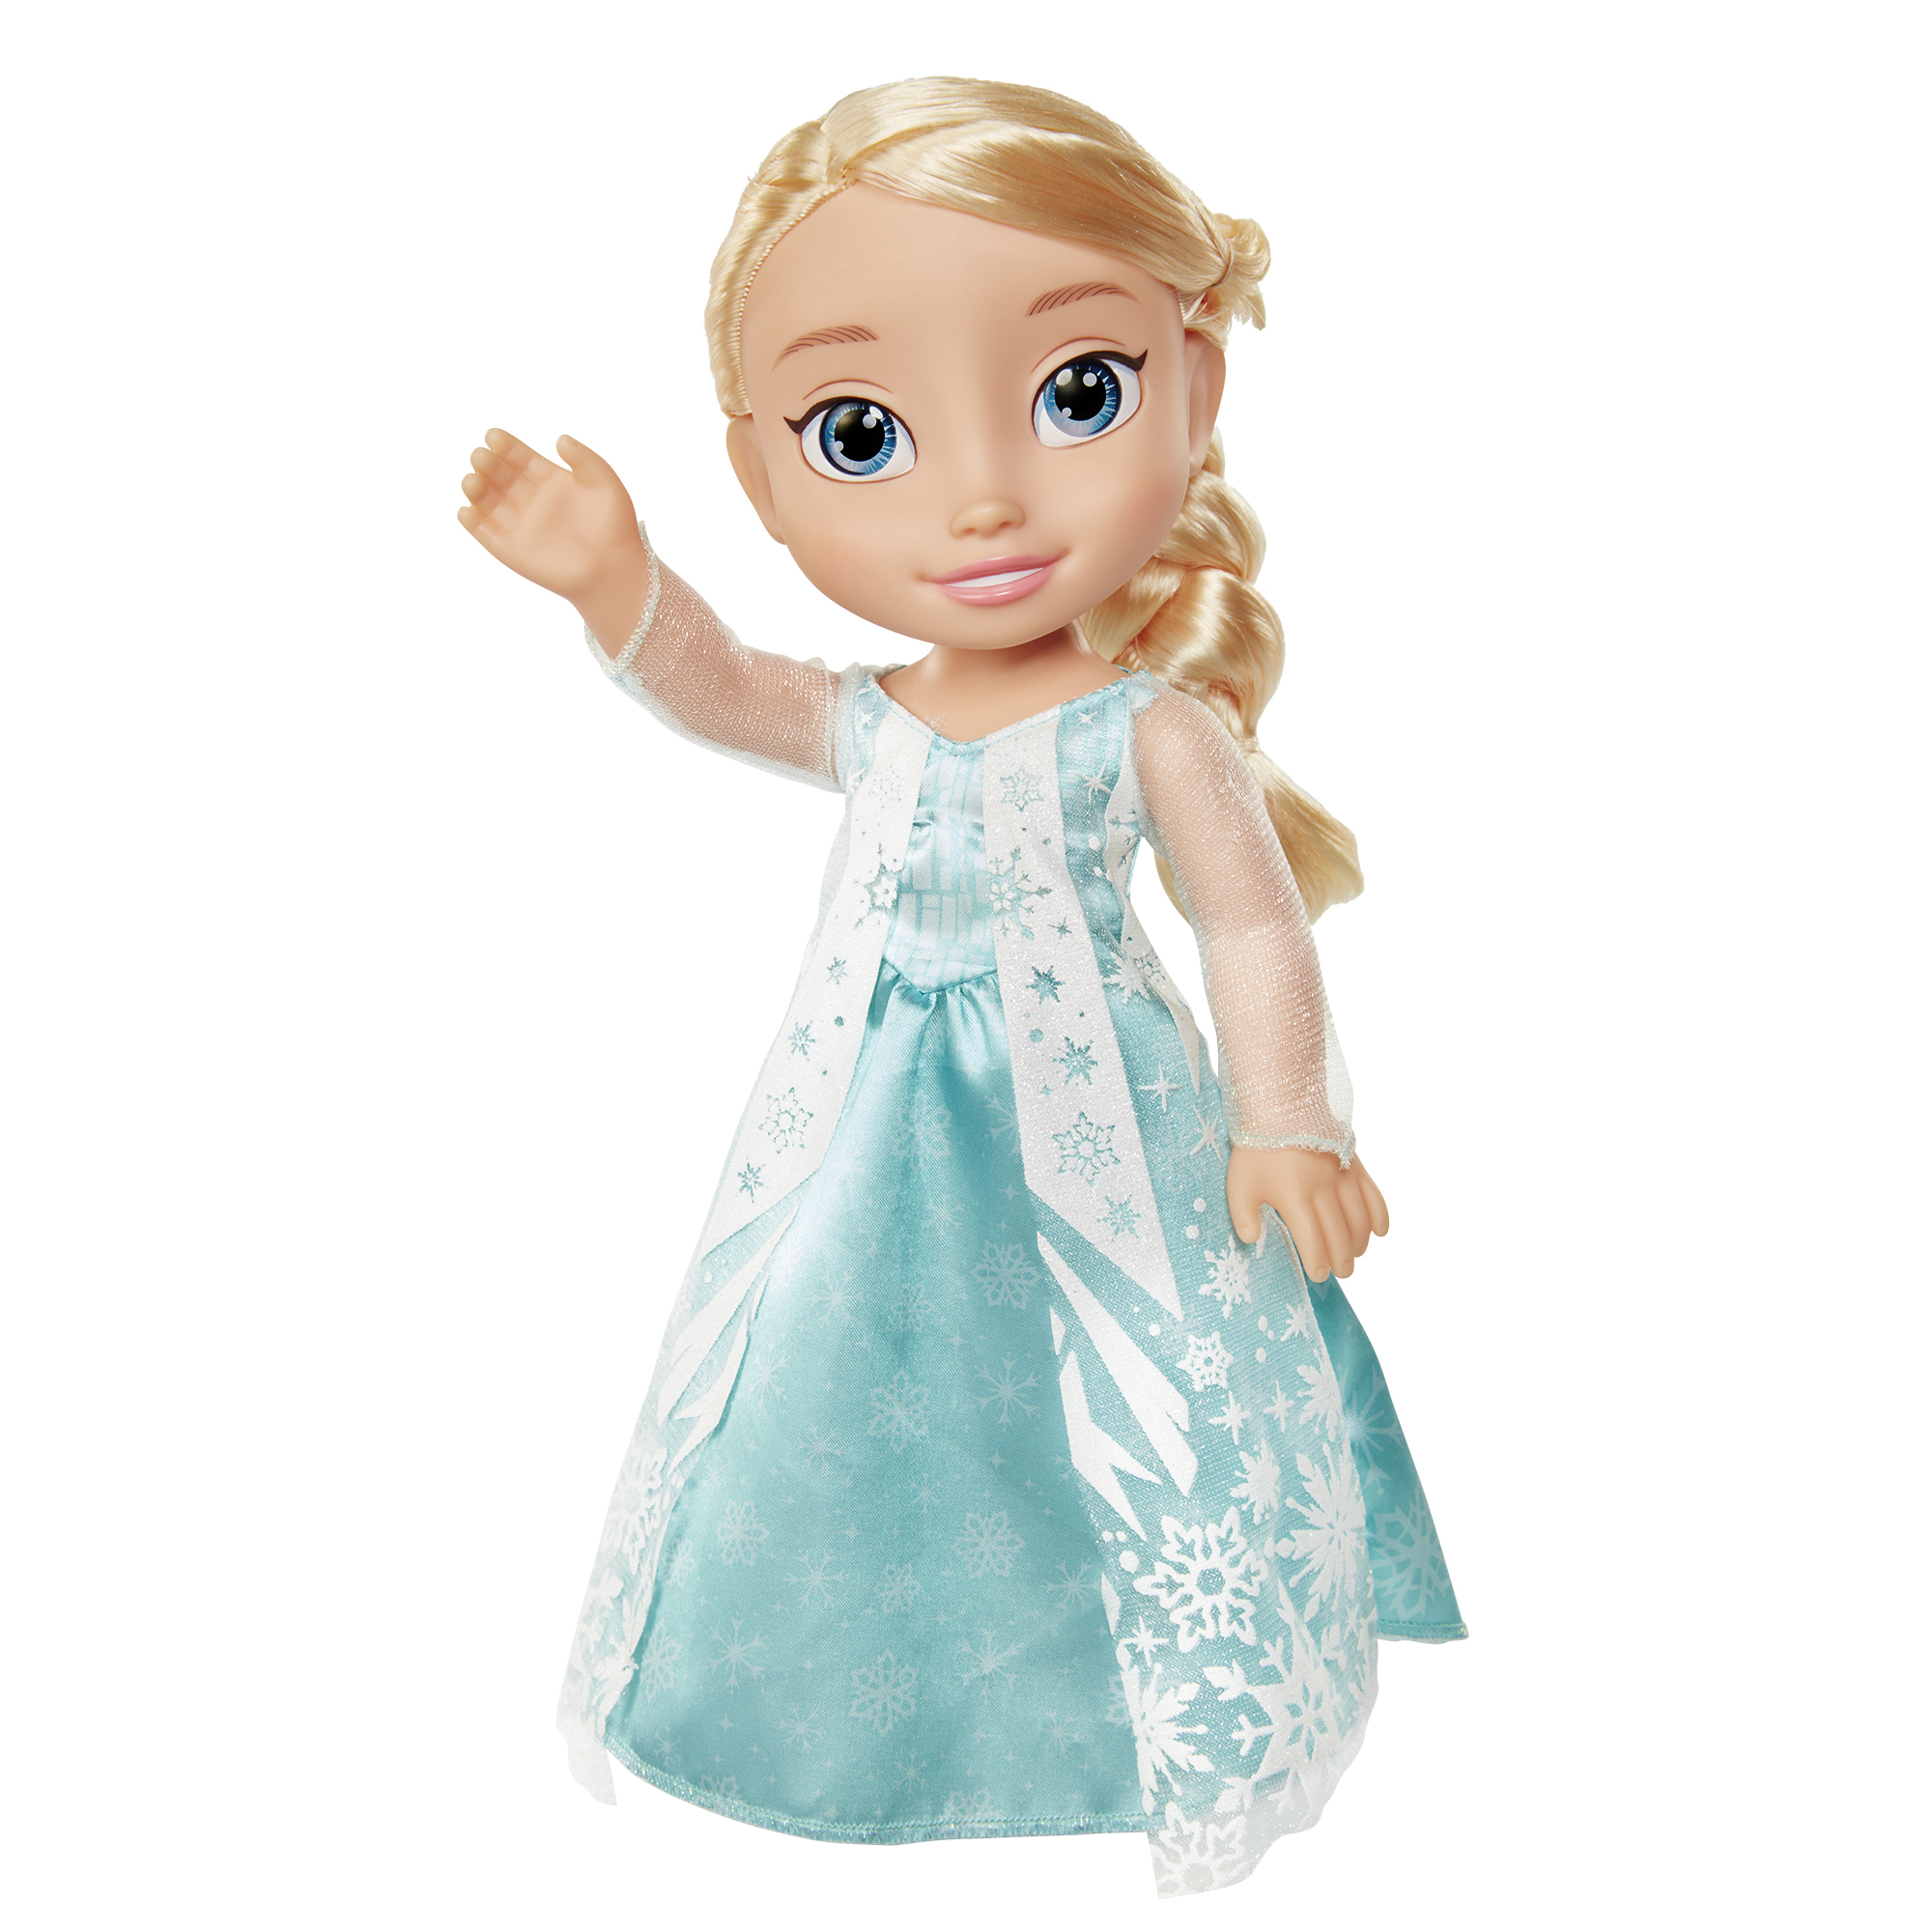 Jakks Posts 15% Increase in Q4 Revenue on Strong Sales of Frozen 2 Products image